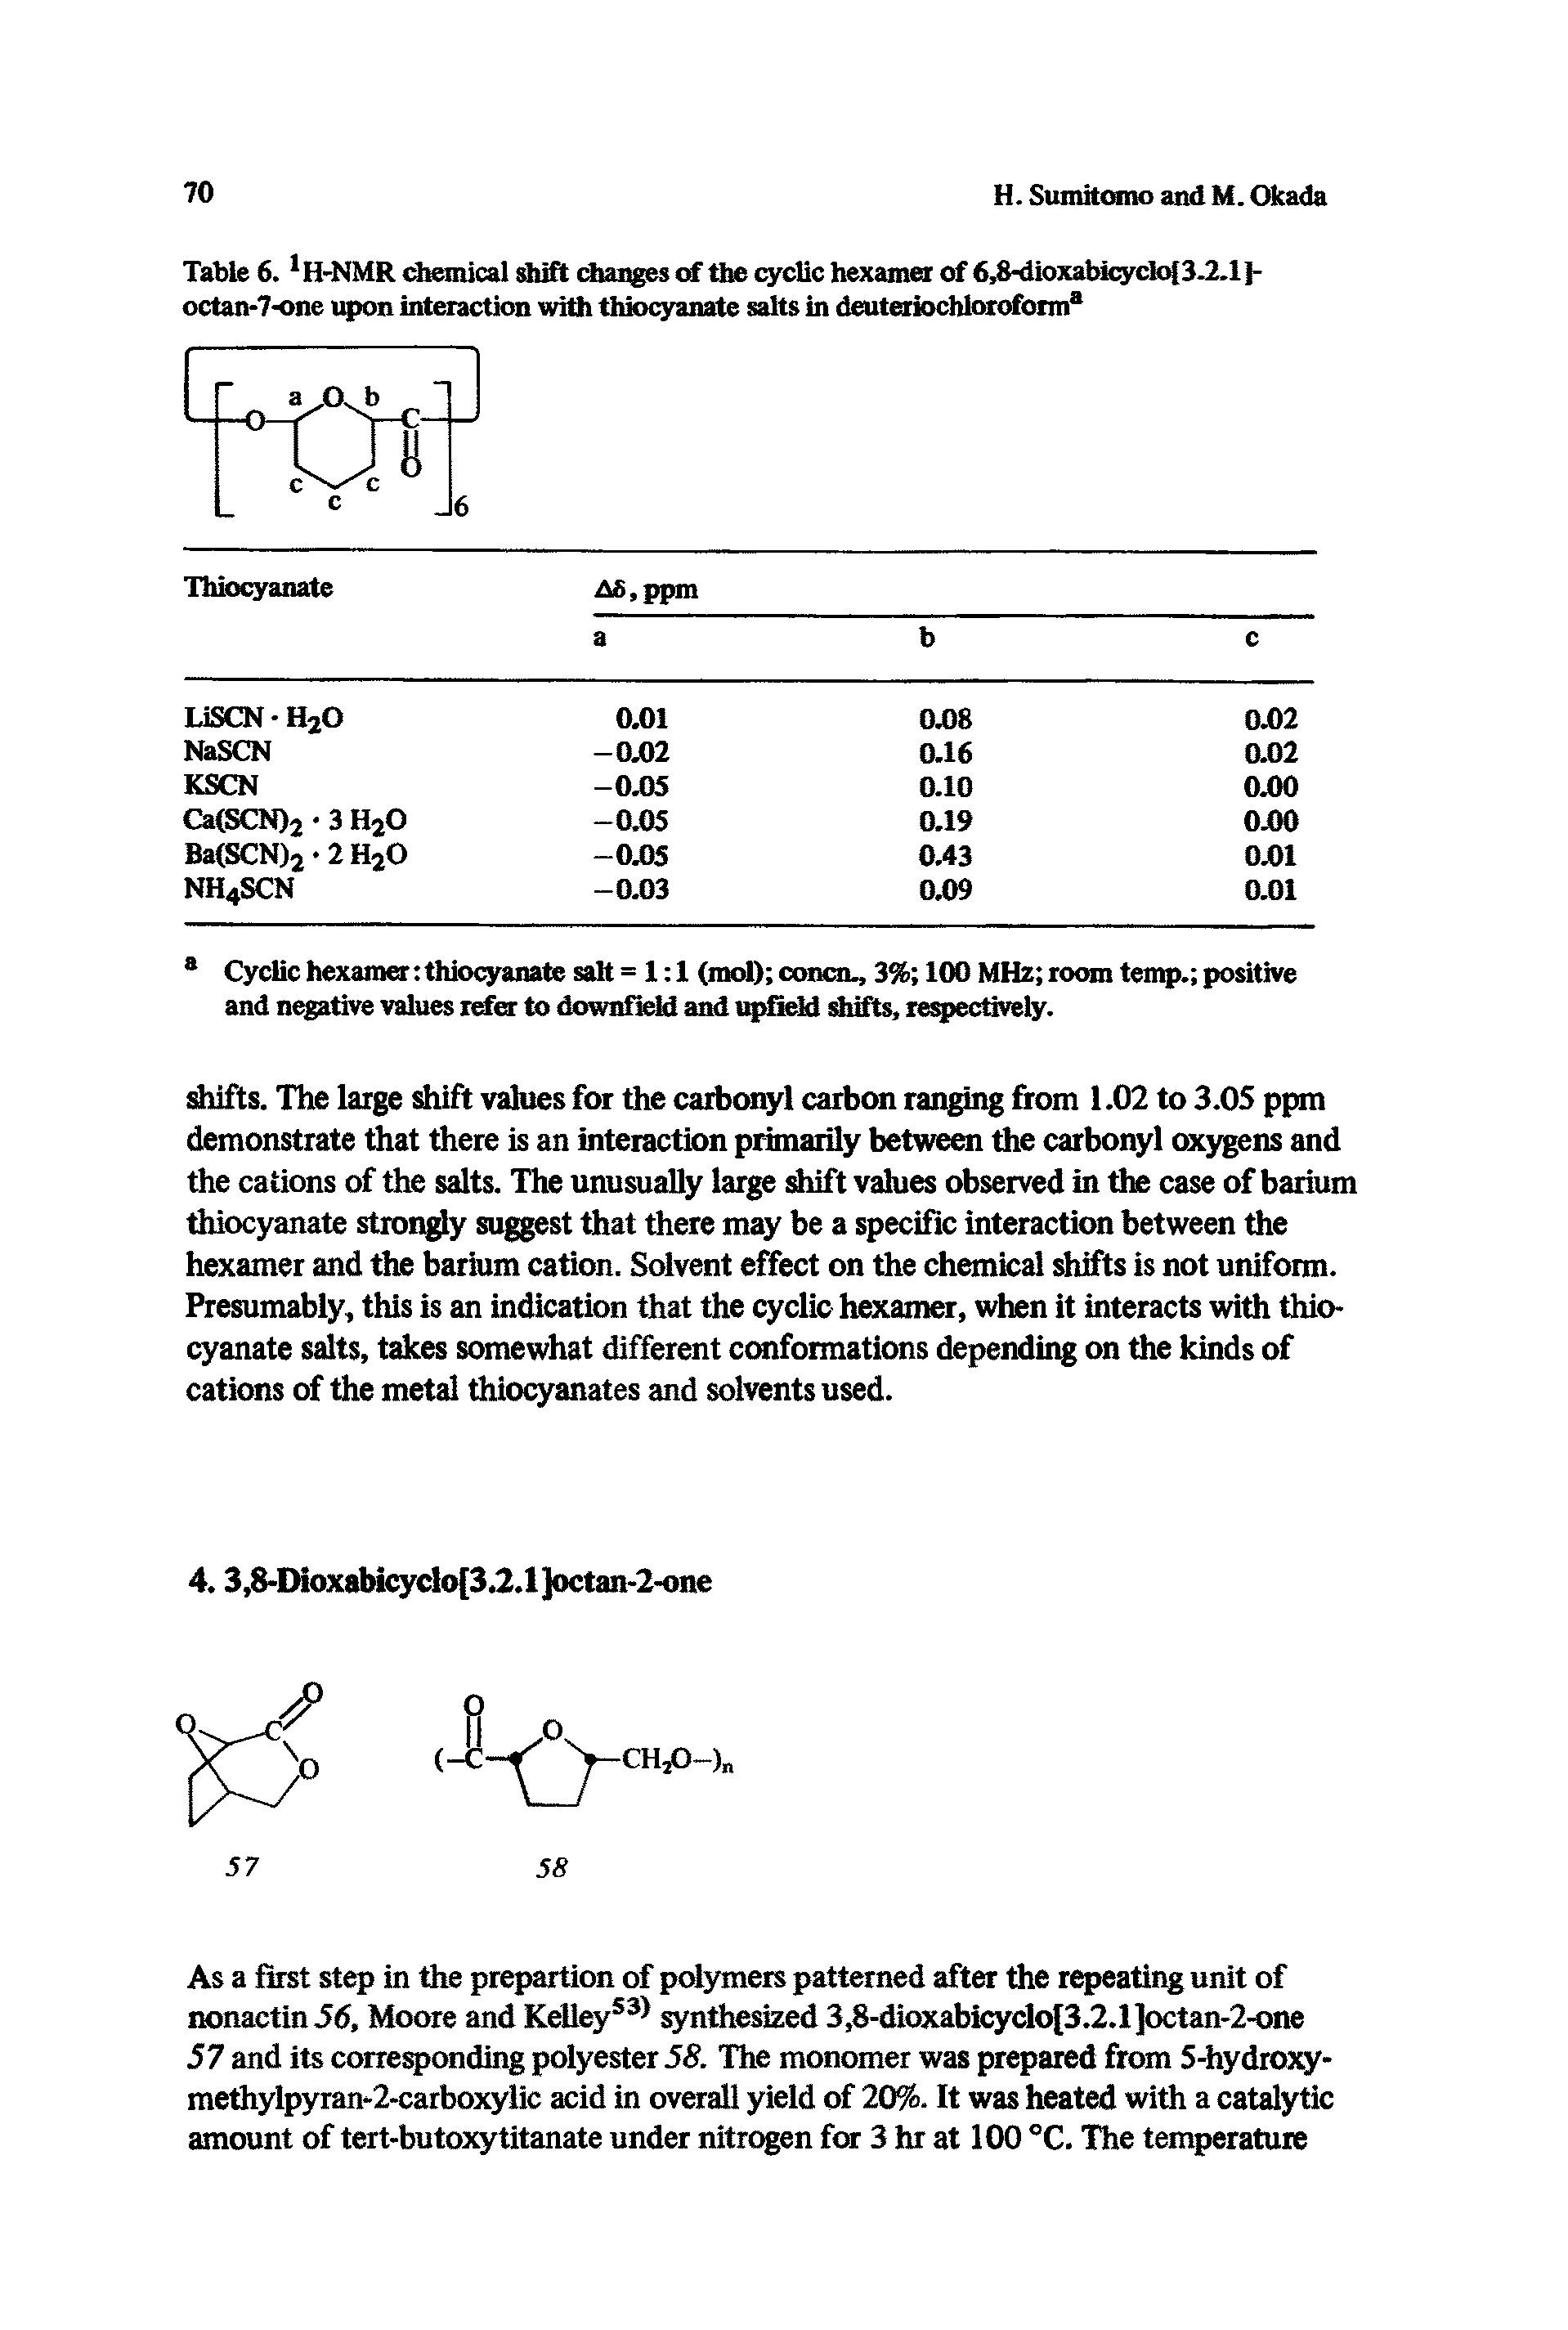 Table 6.1H-NMR chemical shift changes of the cyclic hexamer of 6,8-dioxabicyclo[ 3.2.1 J-octan-7-one upon interaction with thiocyanate salts in deuterkjchloroforma...